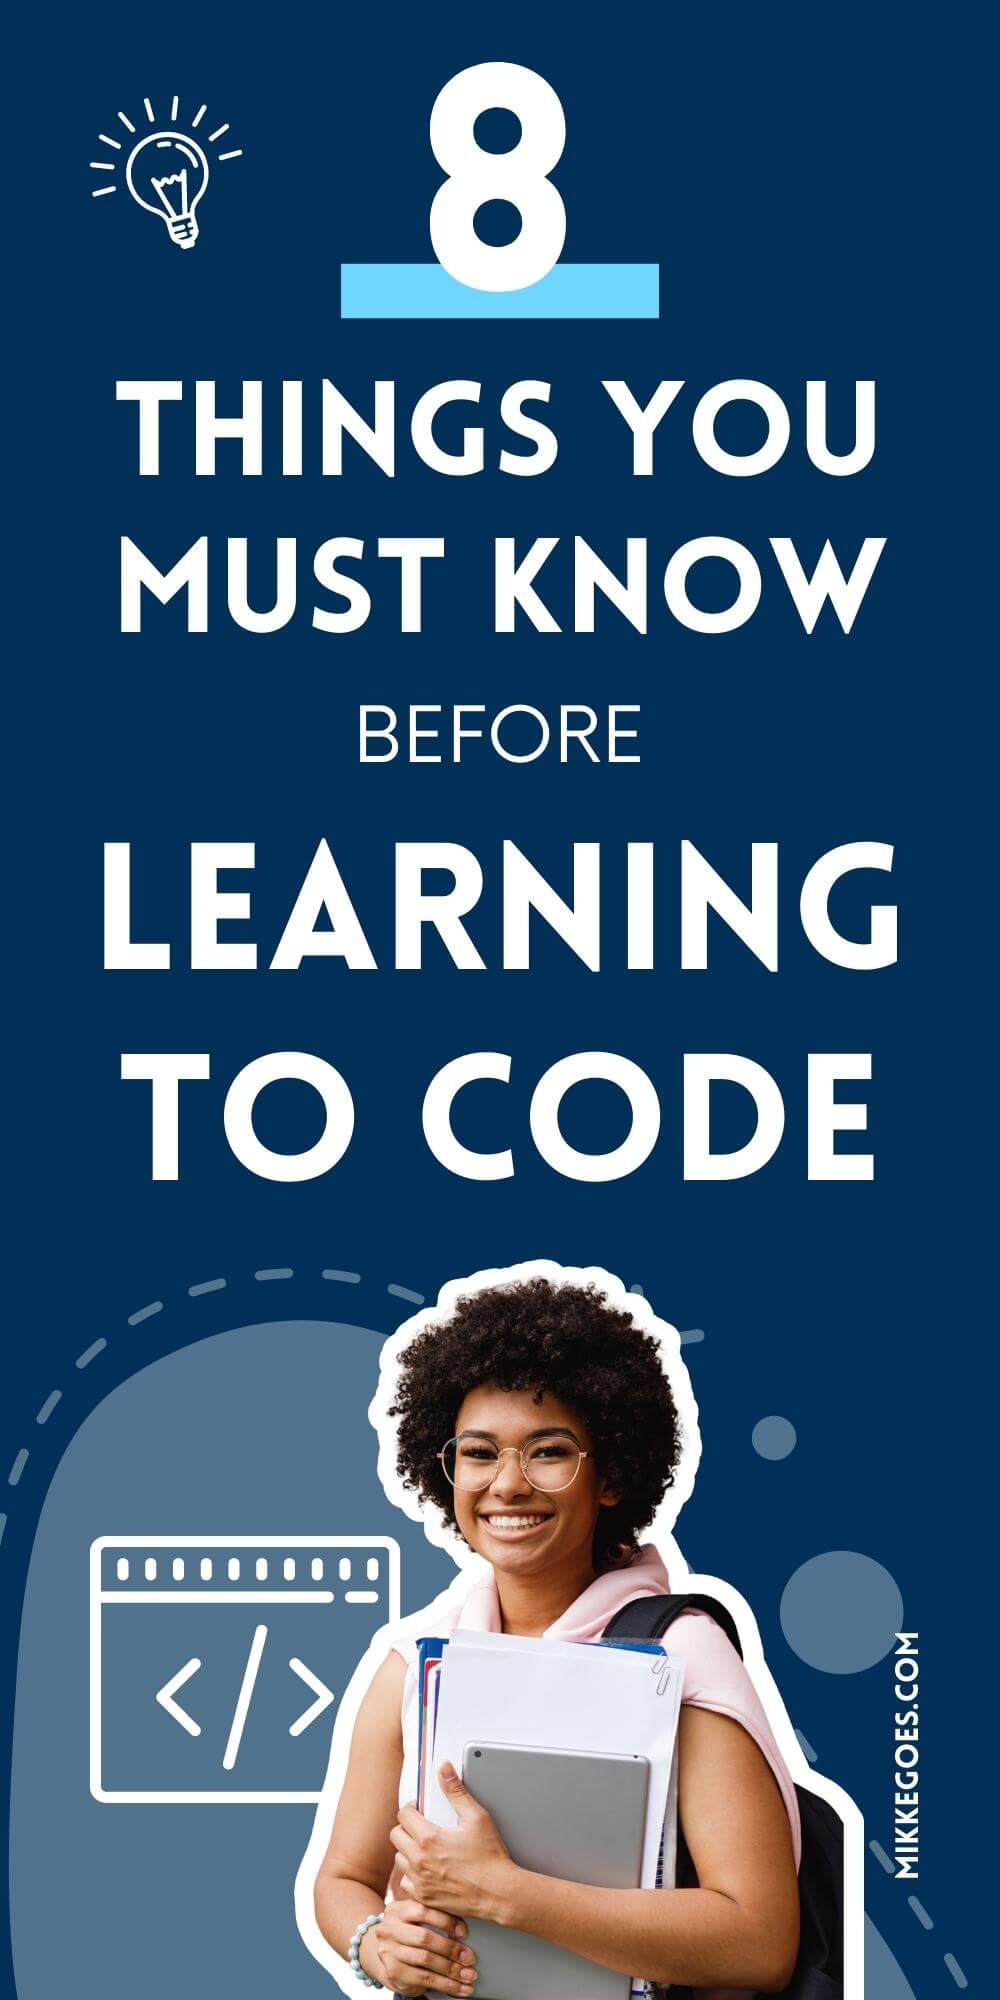 Things you must know before learning computer programming – Coding for beginners